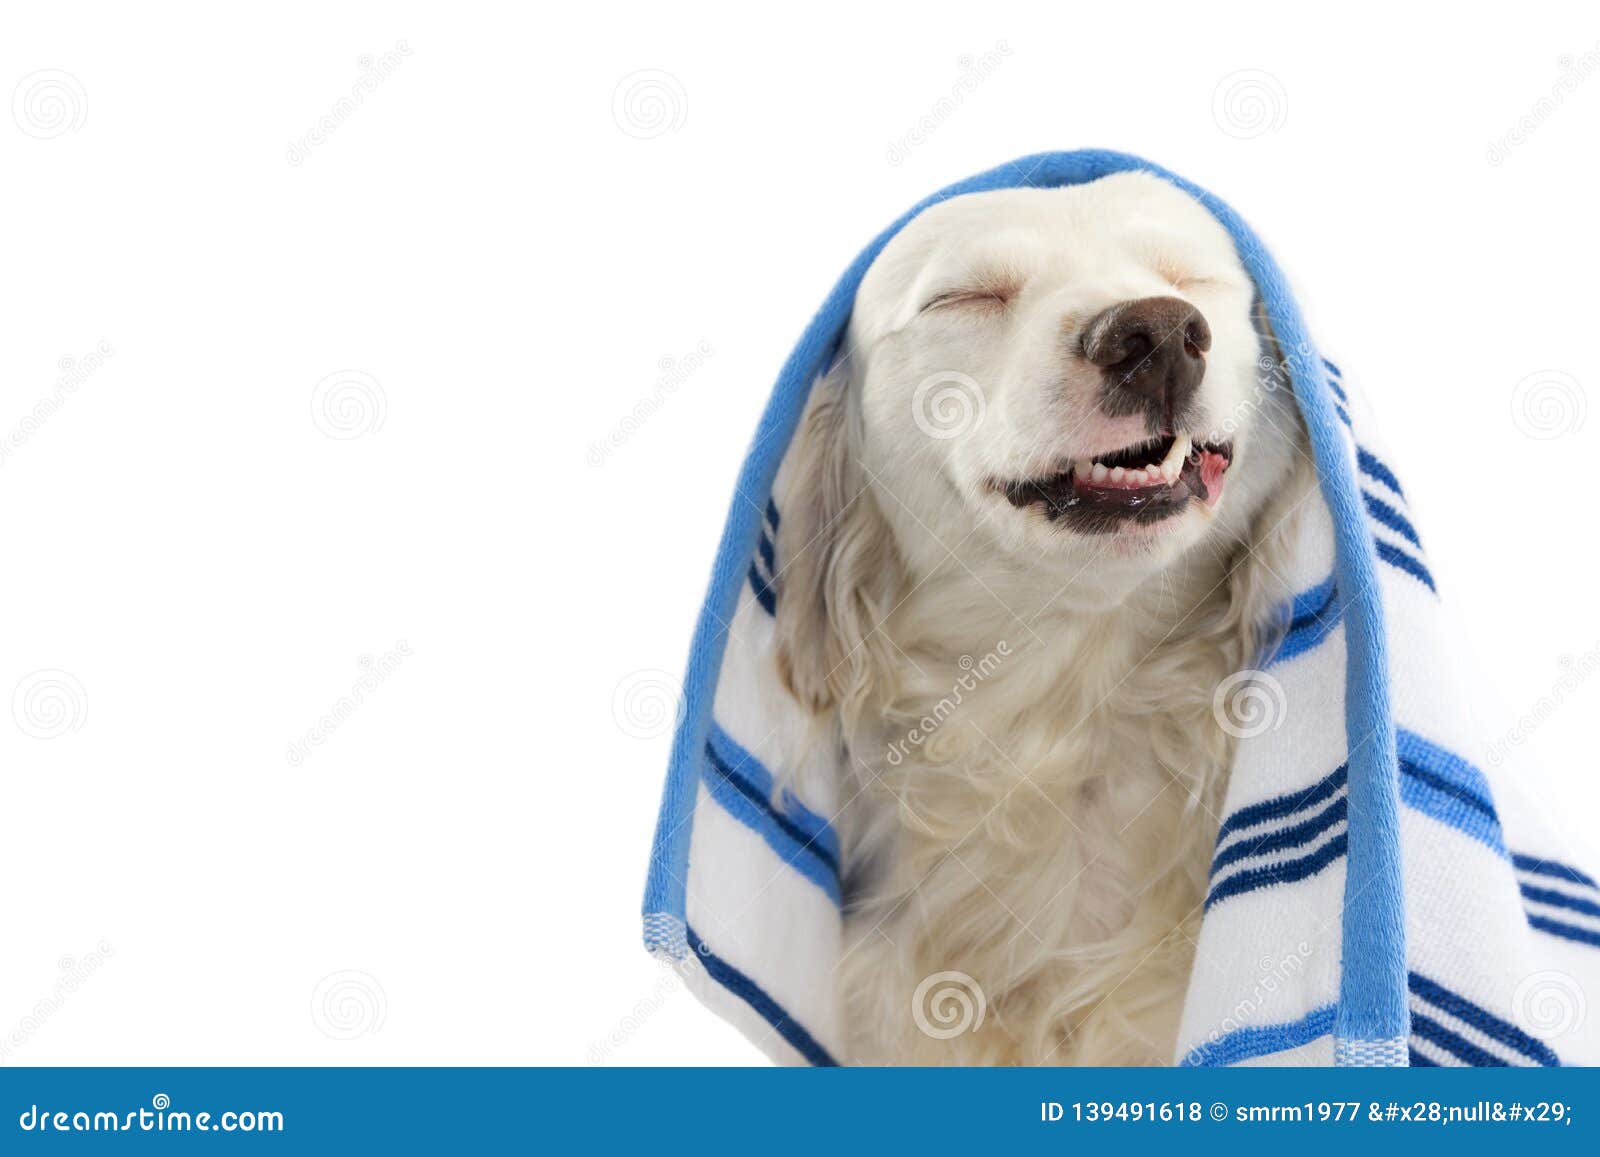 funny dog bathing. mixed-breed puppy wrapped with a blue colored towel. making a face.  studio shot against white